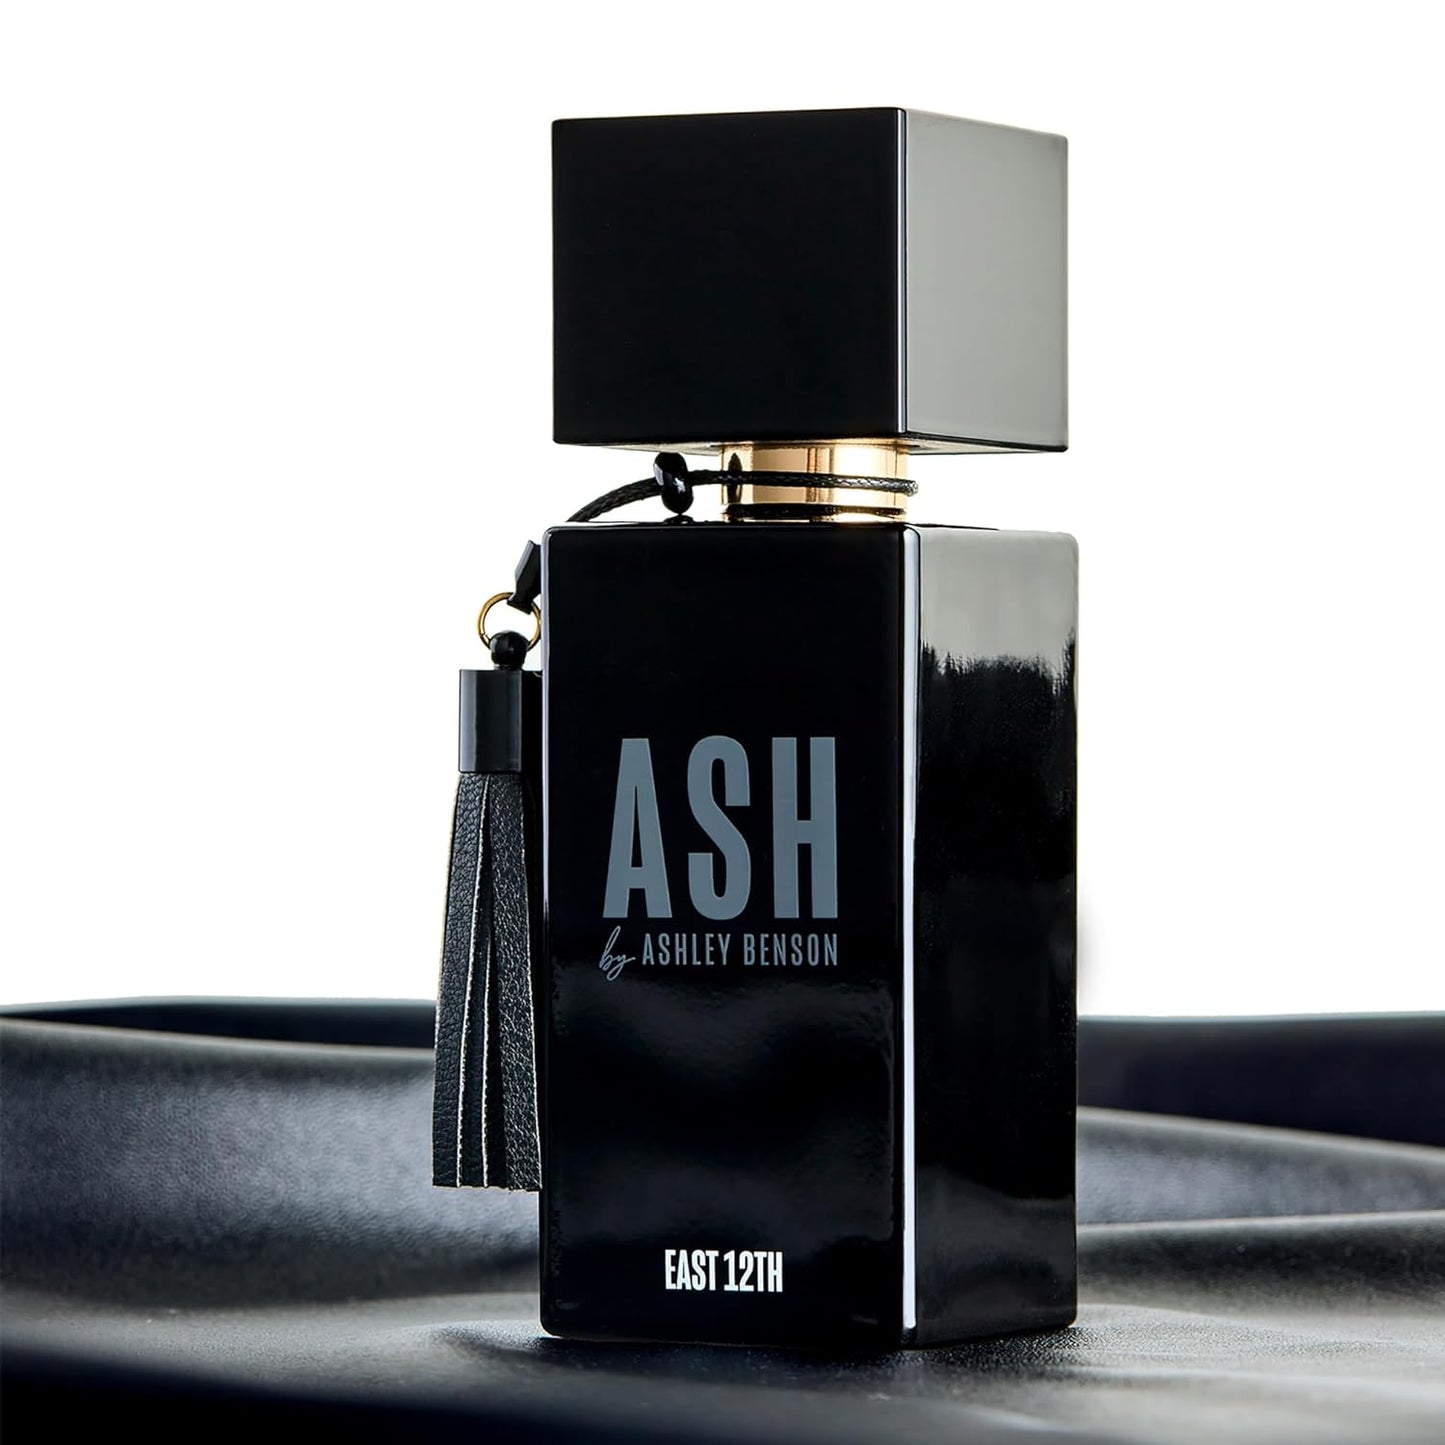 East 12th - Ash by Ashley Benson - Perfume for Men and Women - Bold and Exhilarating Fragrance - Appealing Scent of New York - With Rose Damask, Black Cedar, and Zesty Orange - 1.7 oz EDP Spray